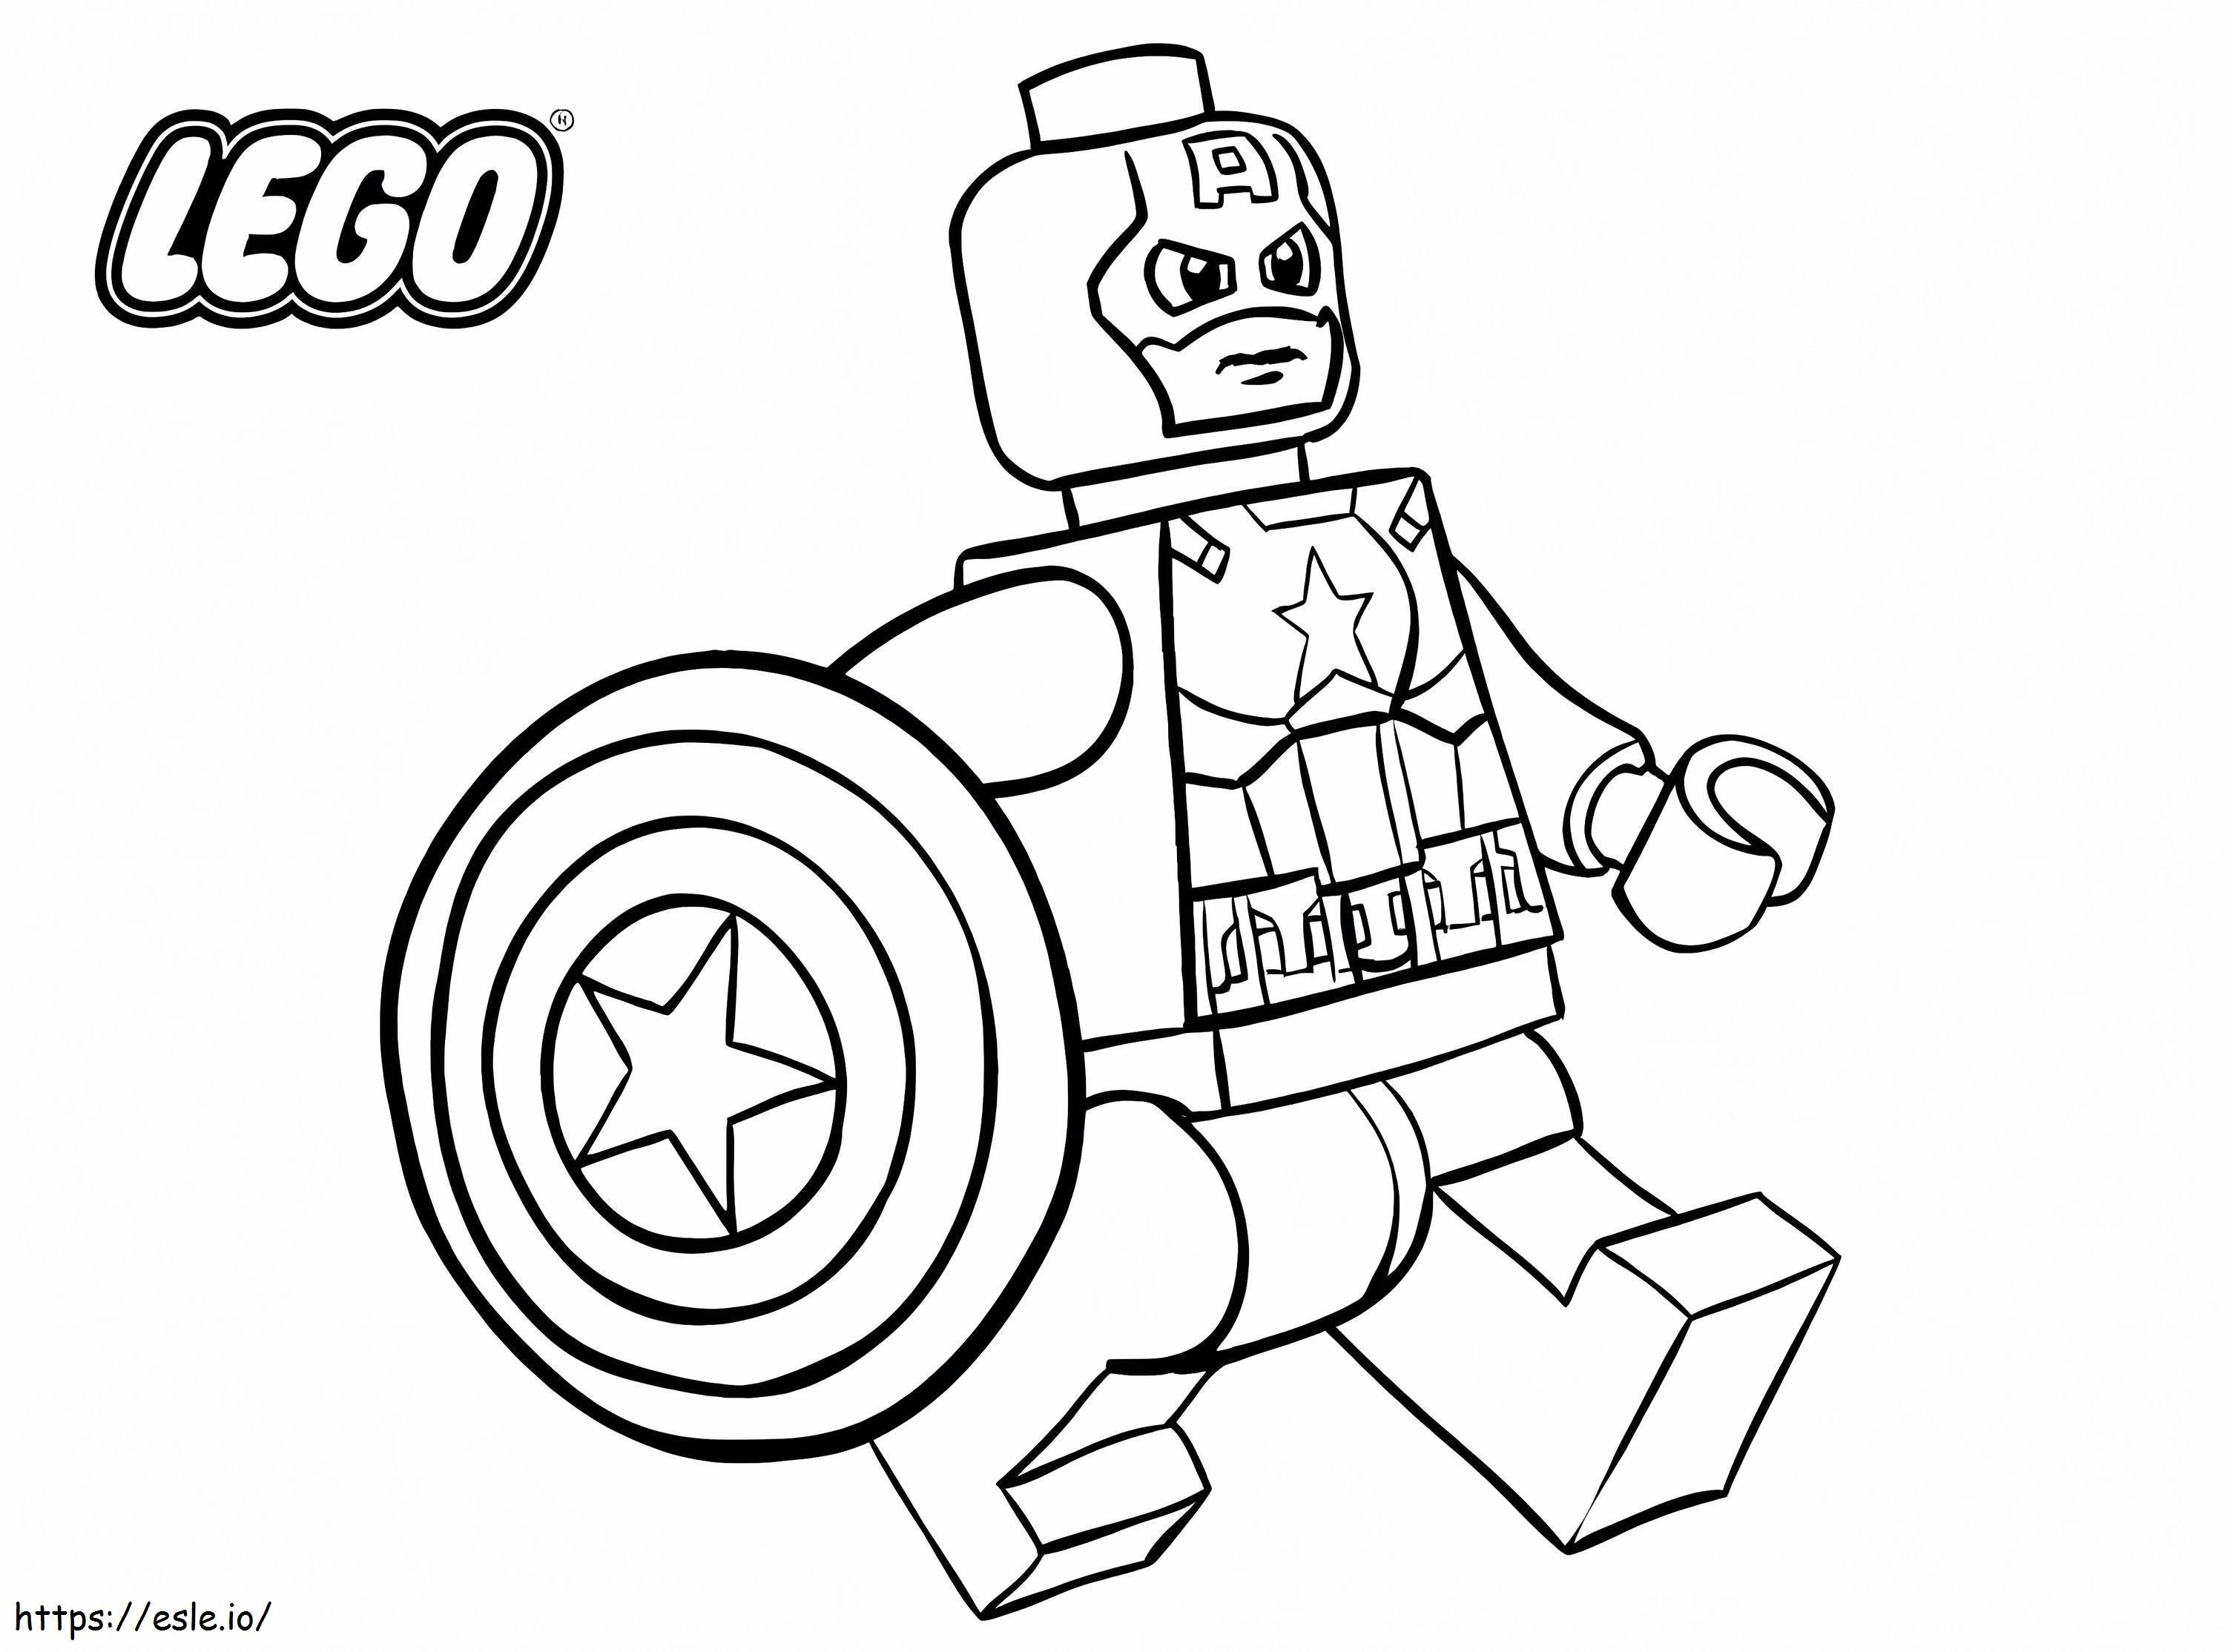 Lego Captain America Running coloring page